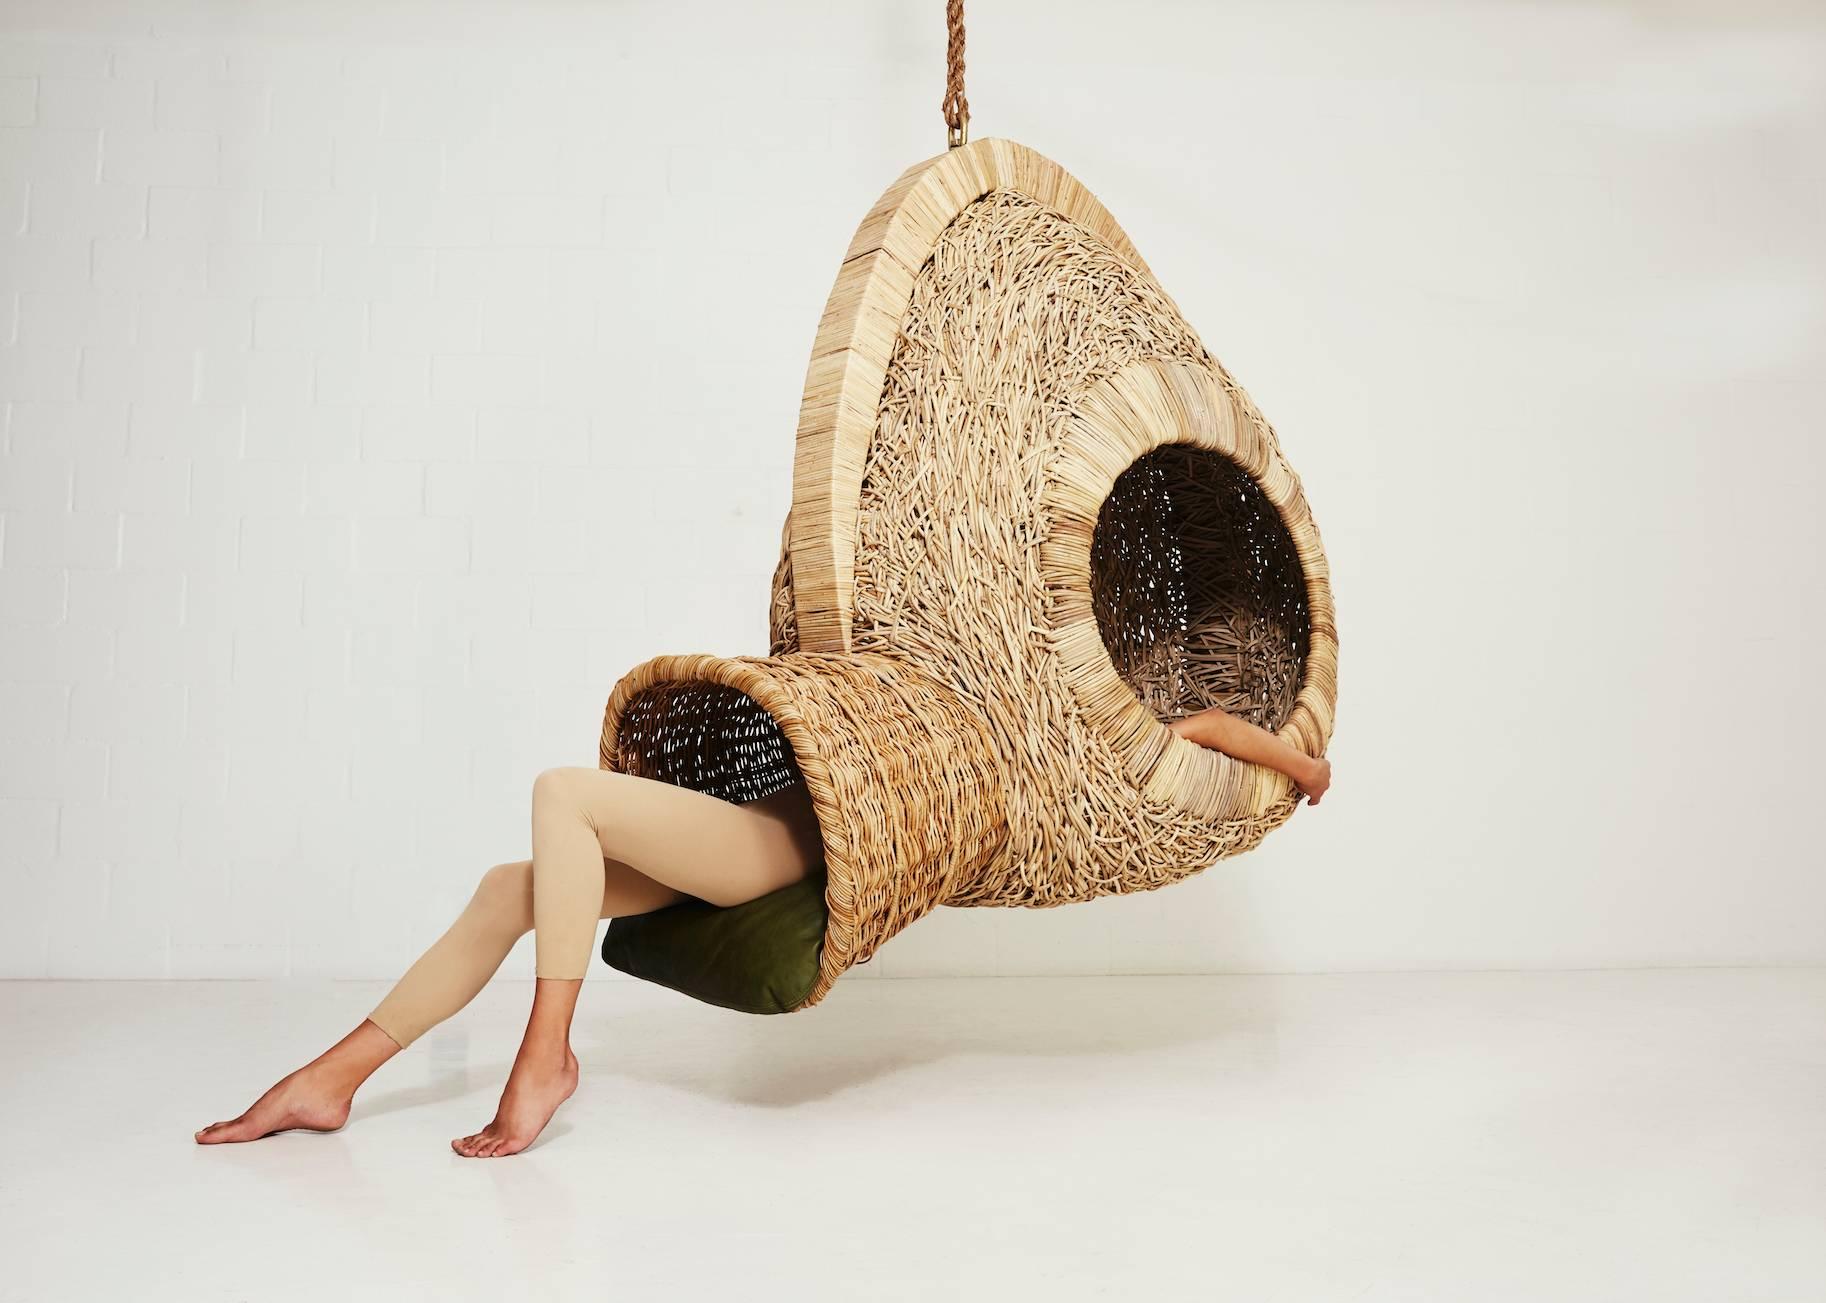 Bwa leaf mask sculptural hanging seat designed and made by Porky Hefer, South Africa, 2016.